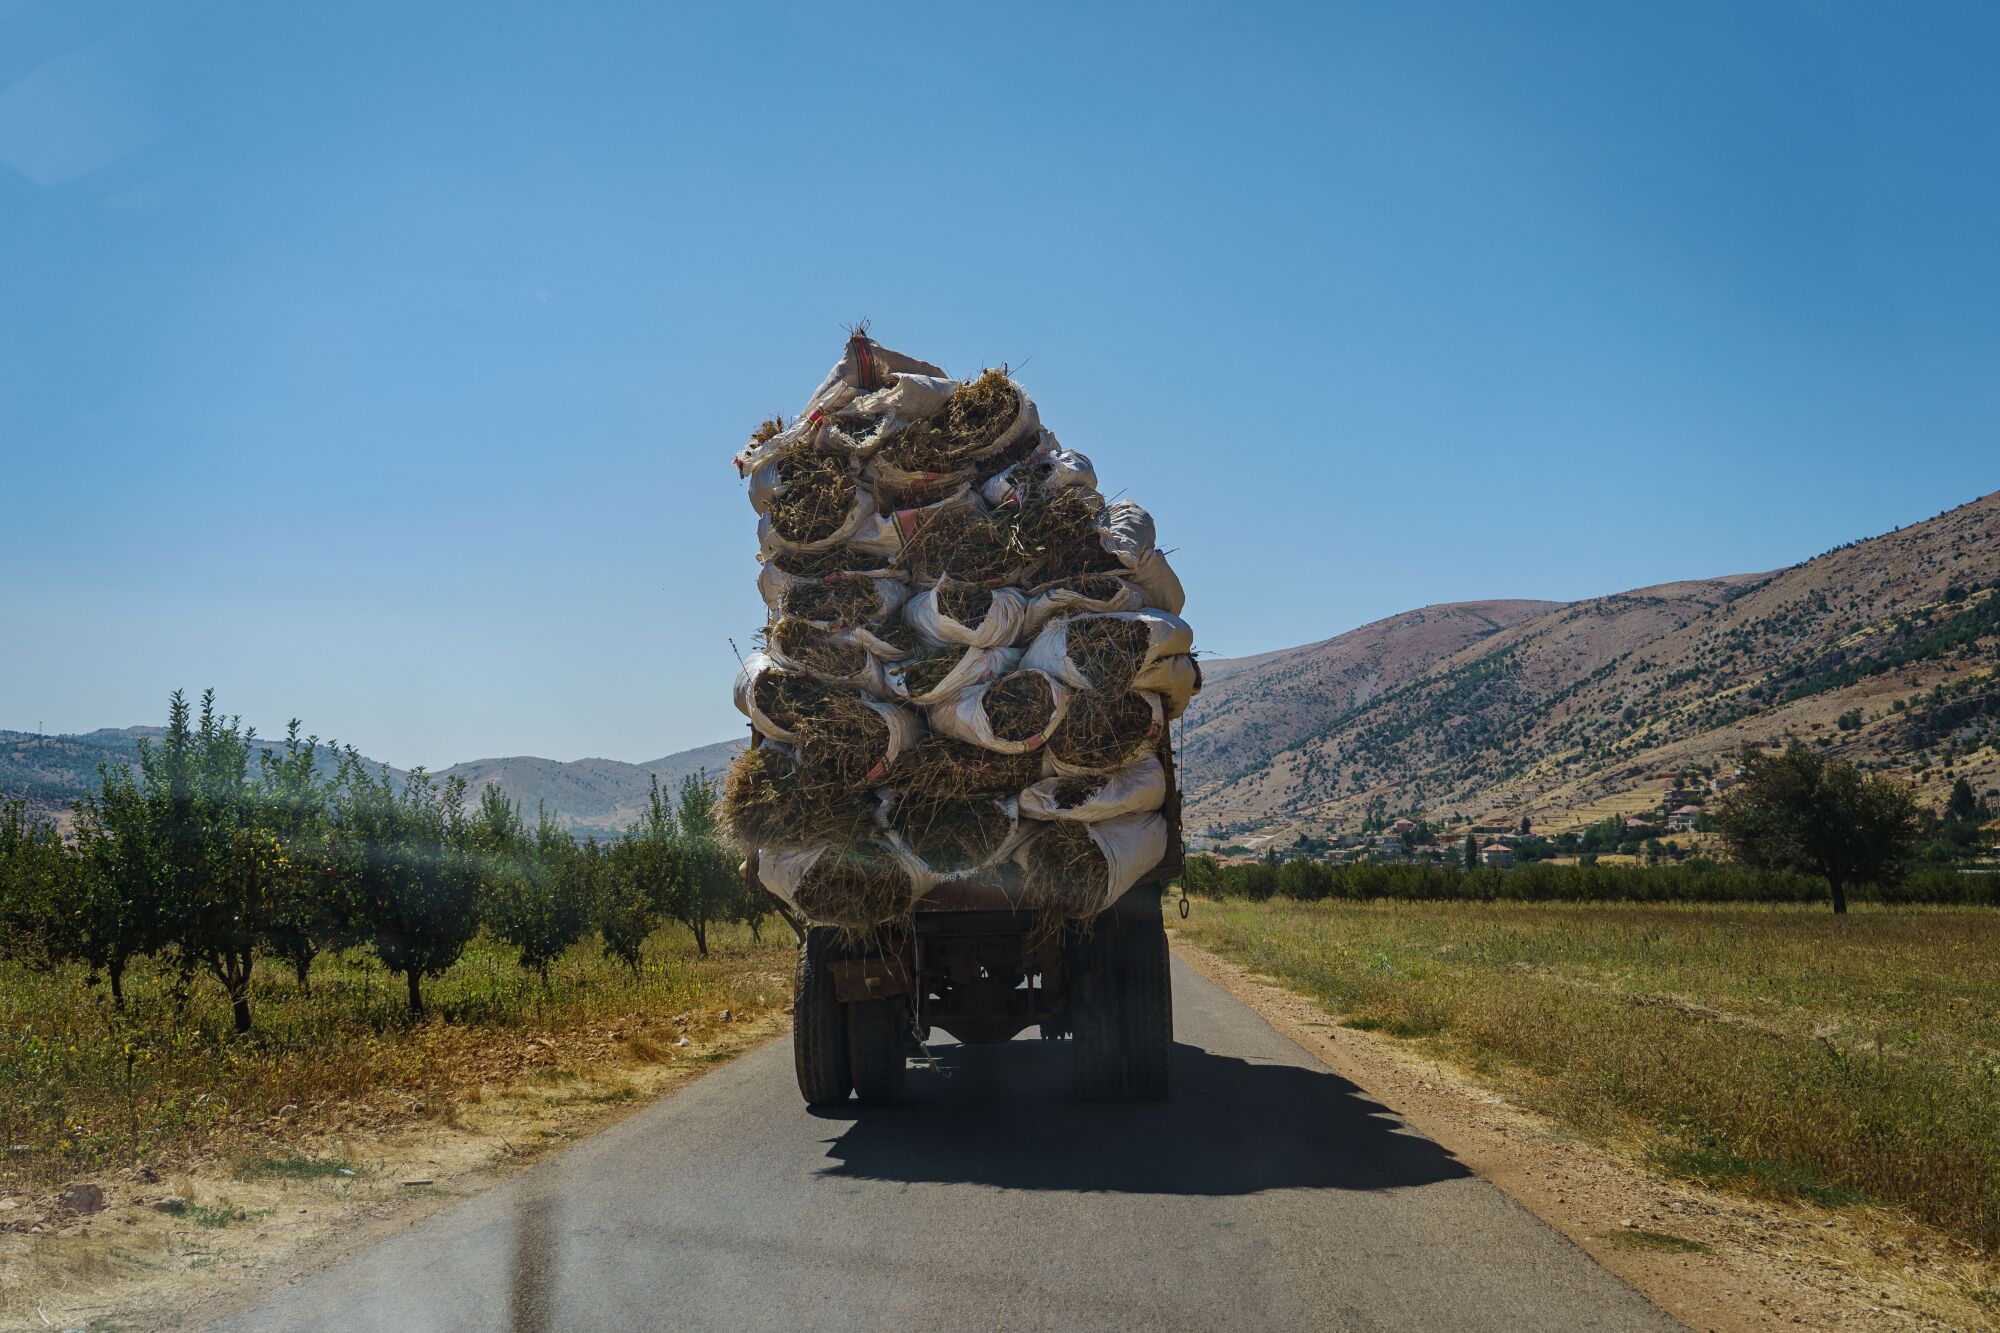 A truck full of dried cannabis plants is transported to an unknown location from a local plantation in Yammouneh, Lebanon.